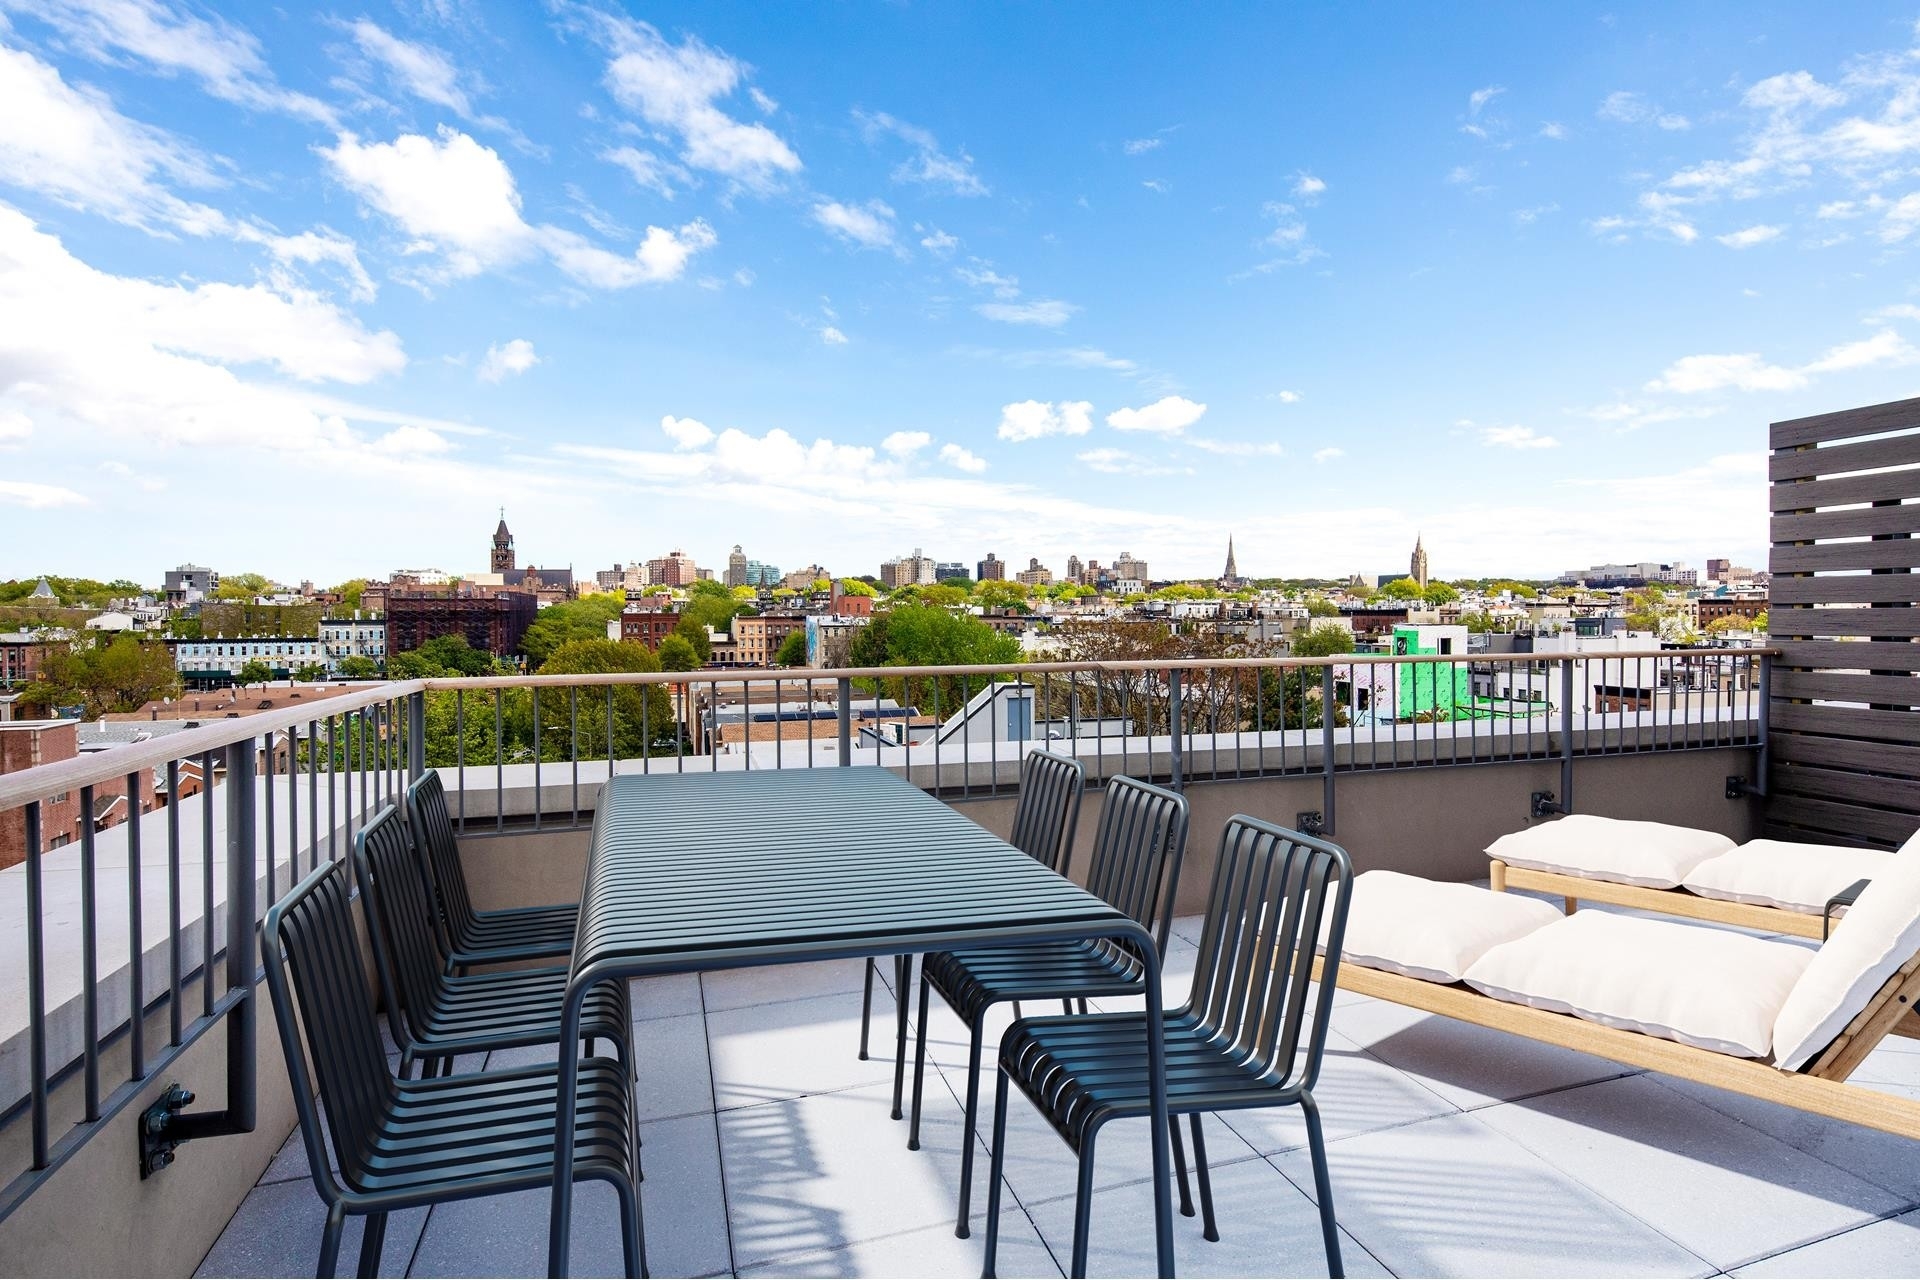 Condominium for Sale at The Butler Collecti, 350 BUTLER ST, 7A Park Slope, Brooklyn, NY 11217